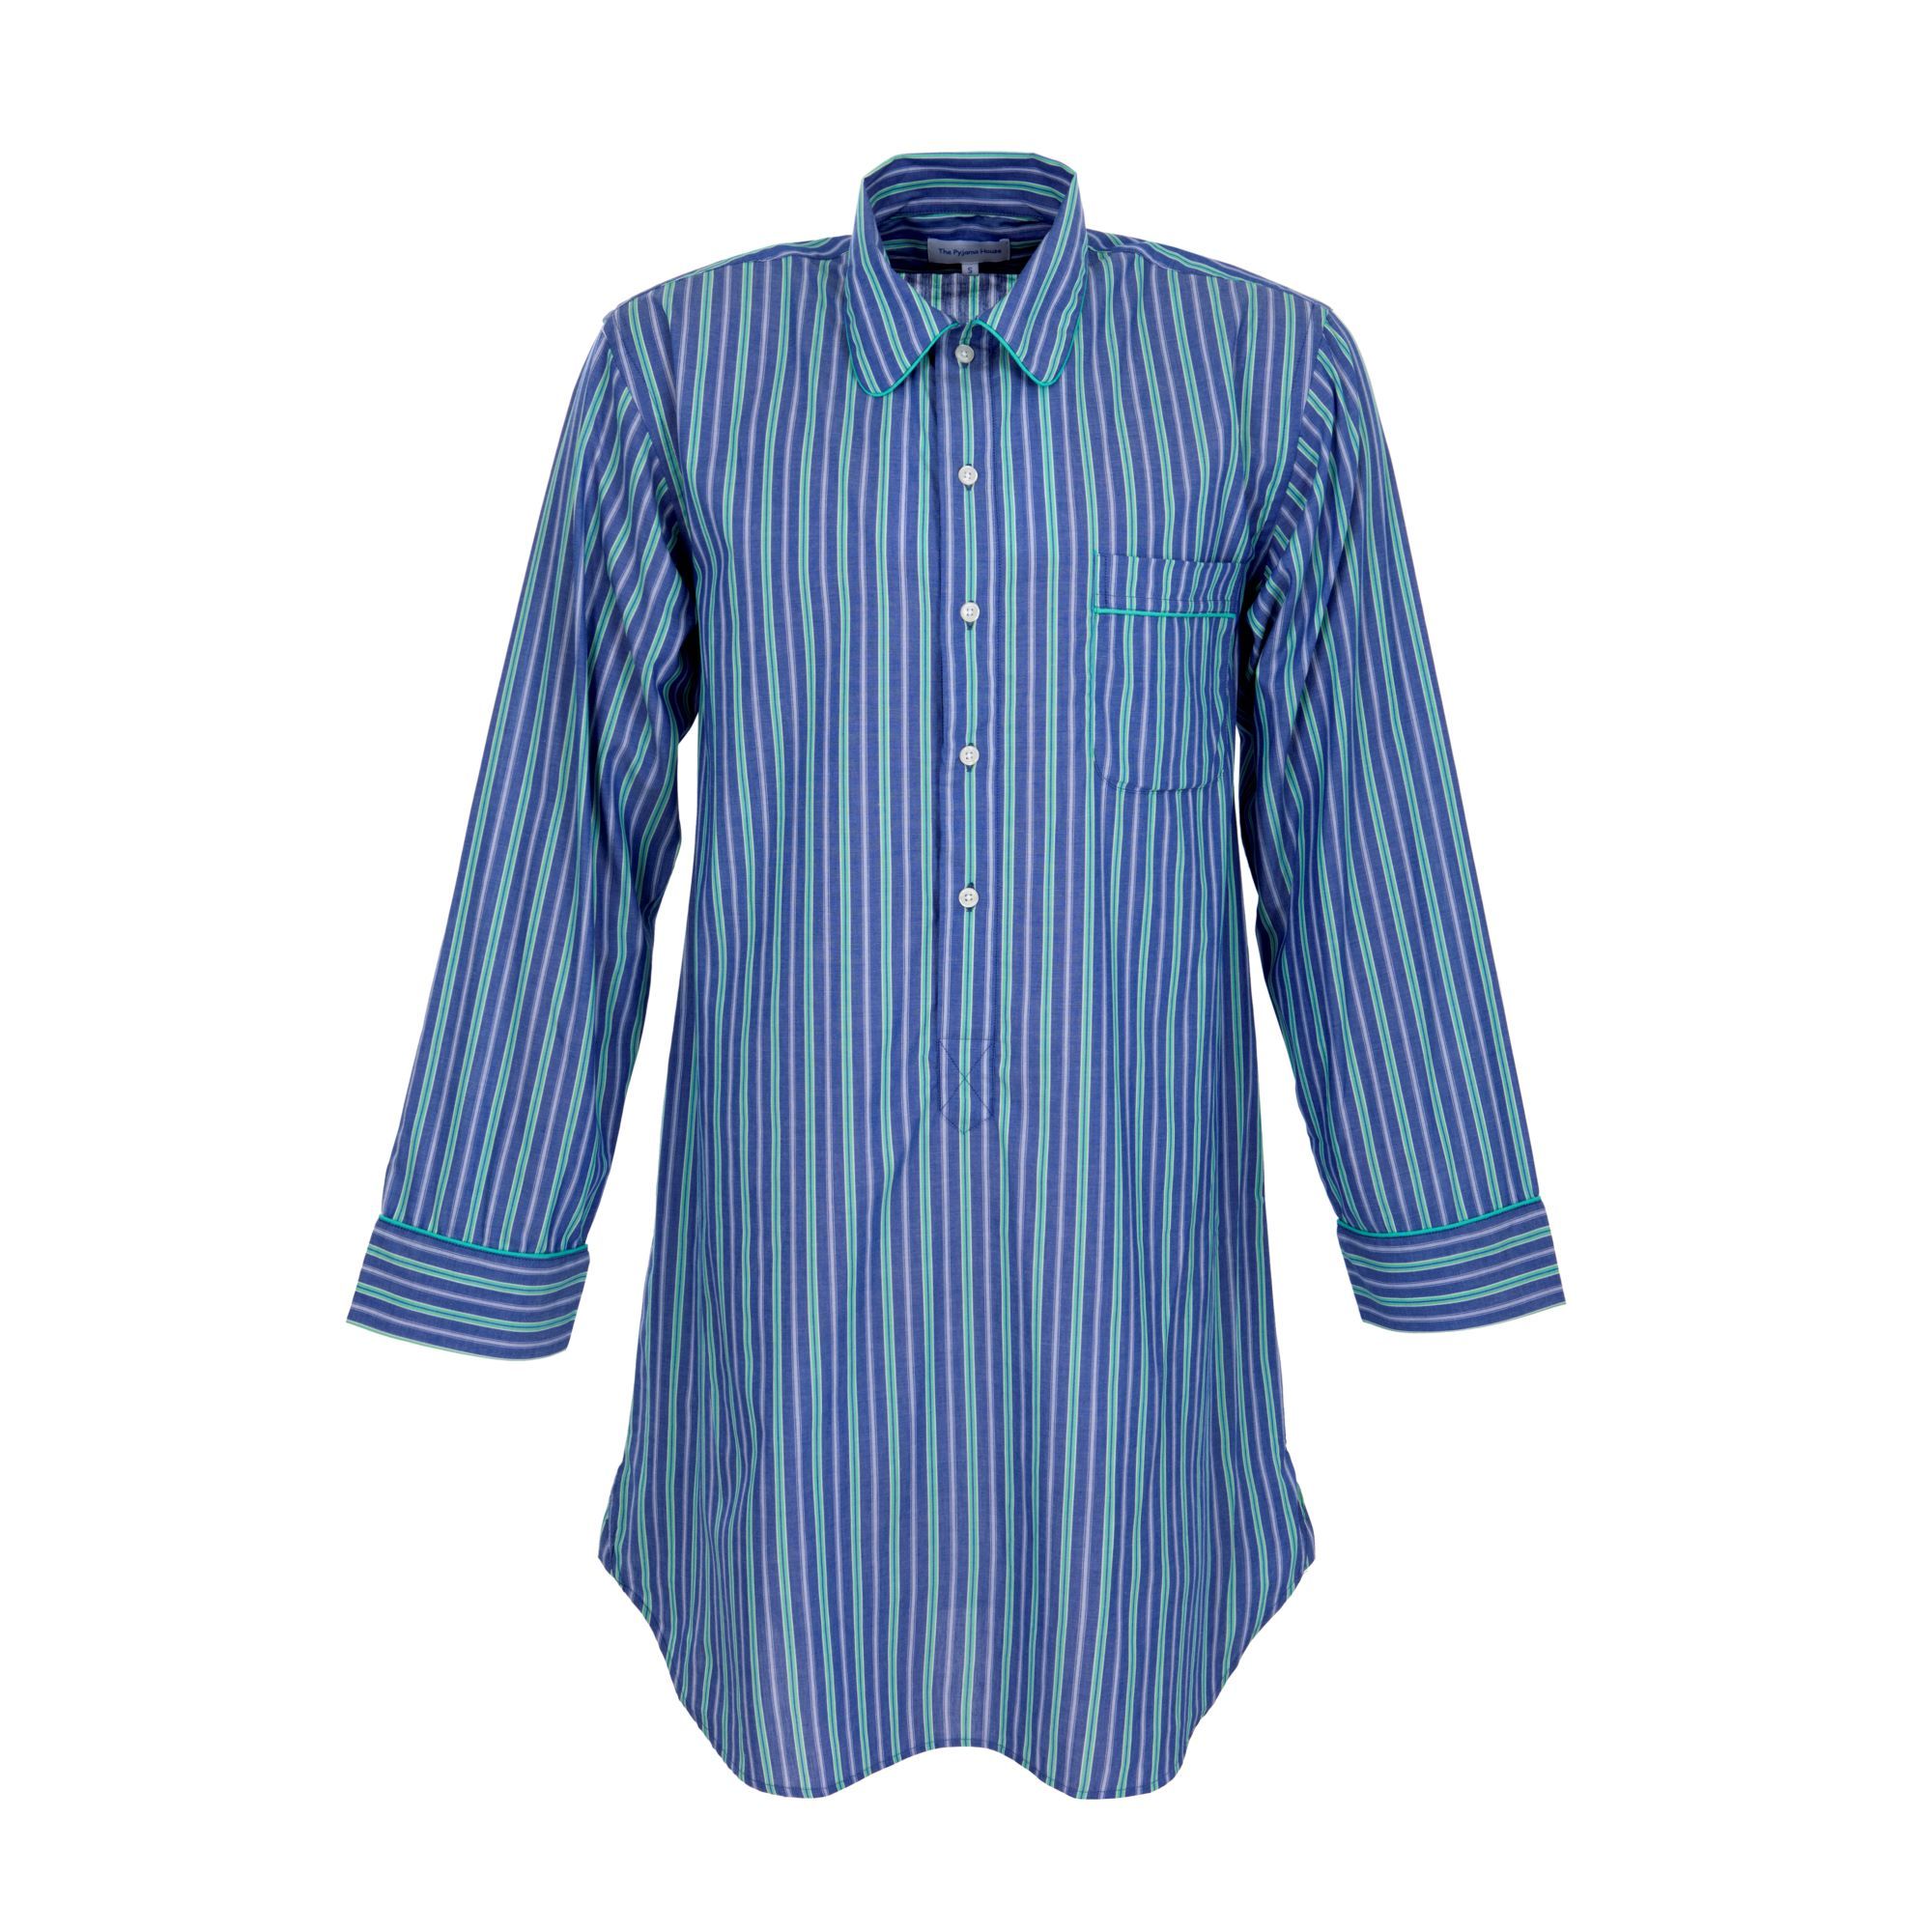 Nightshirts and PJ Bottoms for Fathers Day Perhaps??